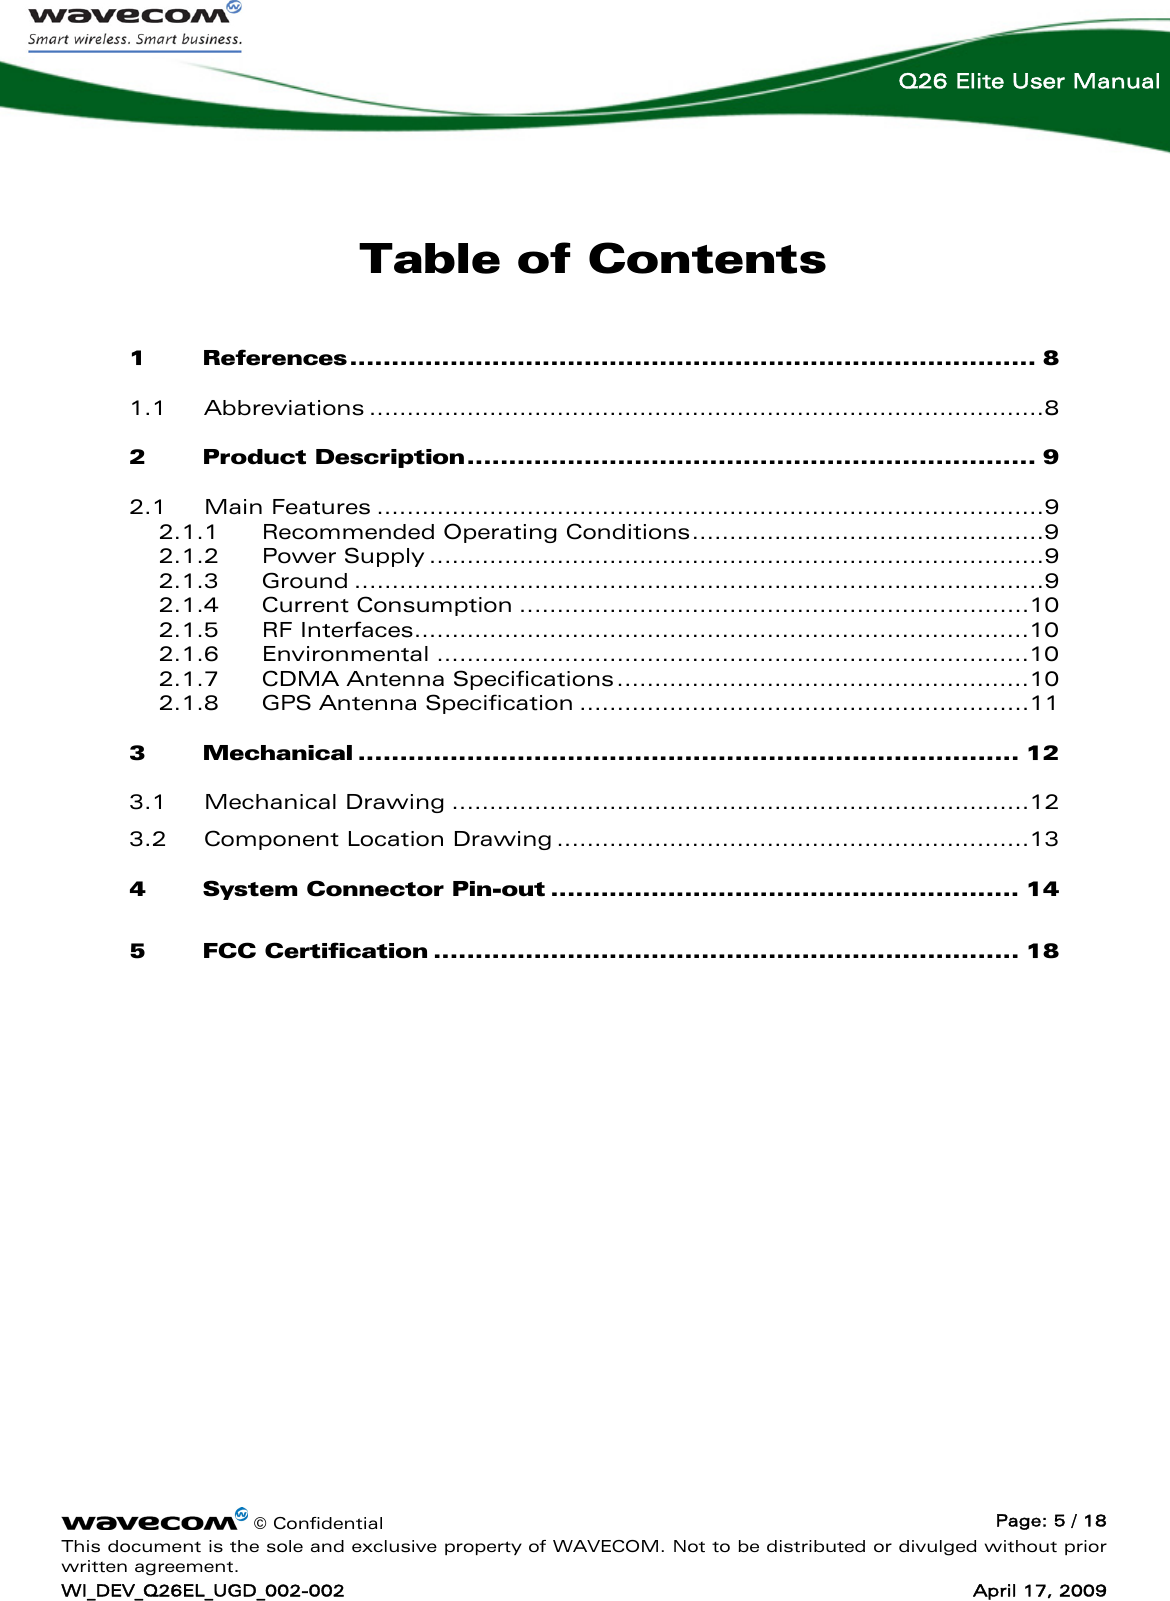    © Confidential  Page: 5 / 18 This document is the sole and exclusive property of WAVECOM. Not to be distributed or divulged without prior written agreement. WI_DEV_Q26EL_UGD_002-002  April 17, 2009  Q26 Elite User Manual Table of Contents 1 References.................................................................................. 8 1.1 Abbreviations ..........................................................................................8 2 Product Description.................................................................... 9 2.1 Main Features .........................................................................................9 2.1.1 Recommended Operating Conditions...............................................9 2.1.2 Power Supply ..................................................................................9 2.1.3 Ground ............................................................................................9 2.1.4 Current Consumption ....................................................................10 2.1.5 RF Interfaces..................................................................................10 2.1.6 Environmental ...............................................................................10 2.1.7 CDMA Antenna Specifications.......................................................10 2.1.8 GPS Antenna Specification ............................................................11 3 Mechanical ............................................................................... 12 3.1 Mechanical Drawing .............................................................................12 3.2 Component Location Drawing ...............................................................13 4 System Connector Pin-out ........................................................ 14 5 FCC Certification ...................................................................... 18  